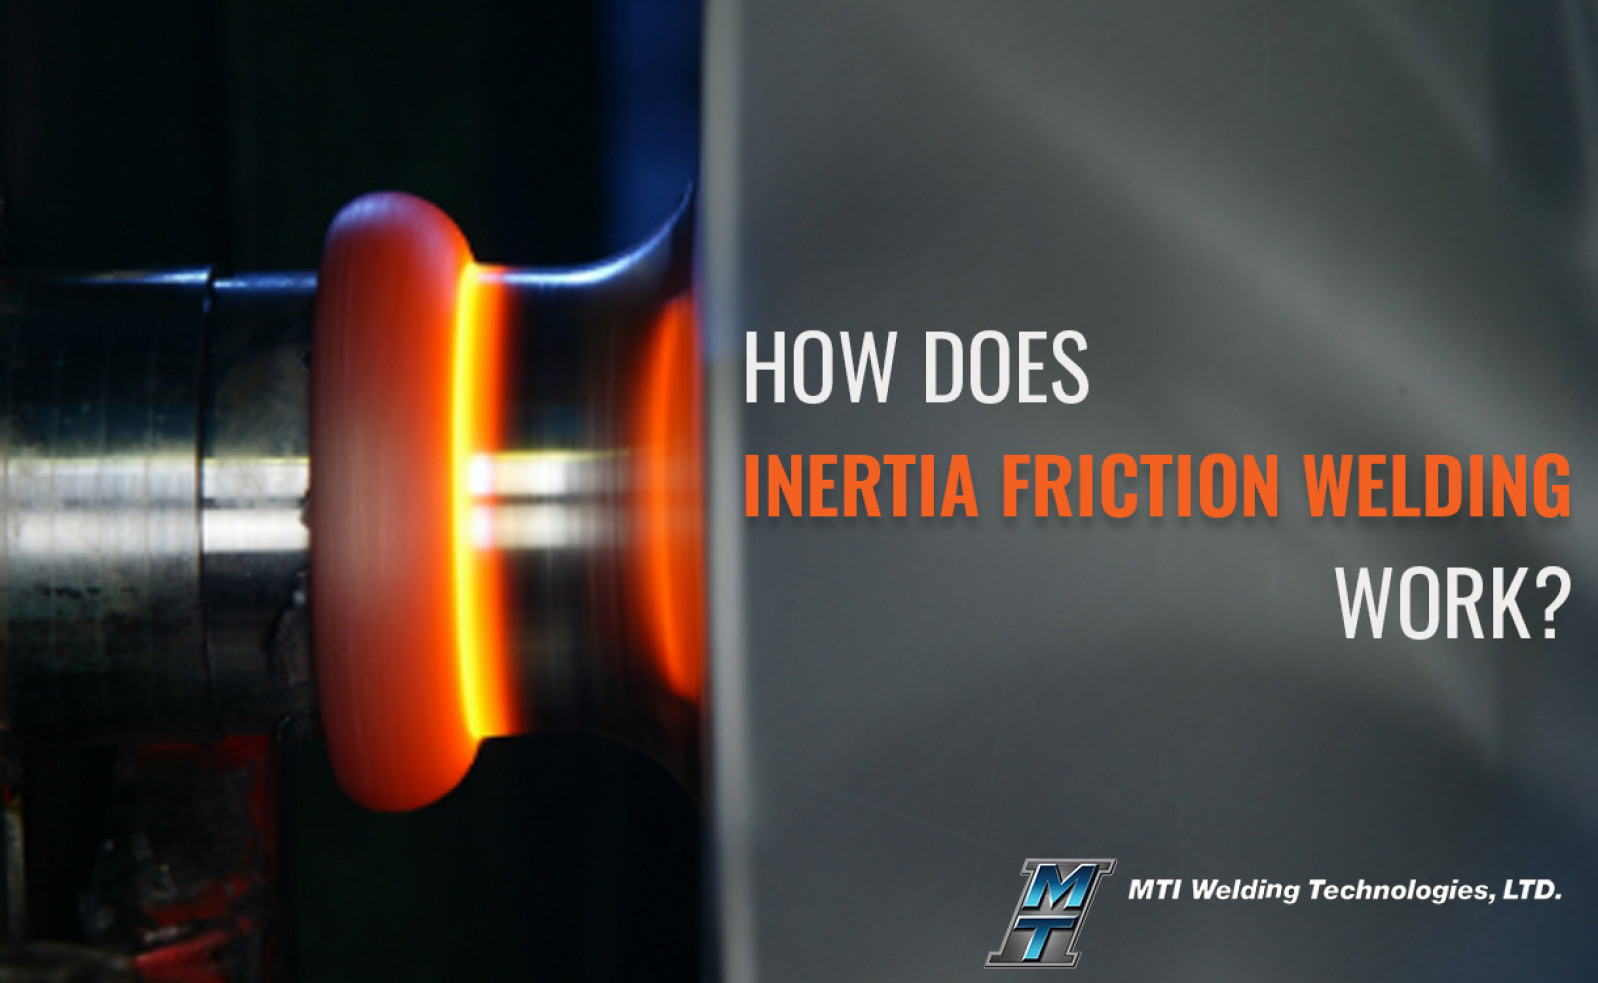 Inertia Friction Welding from MTI